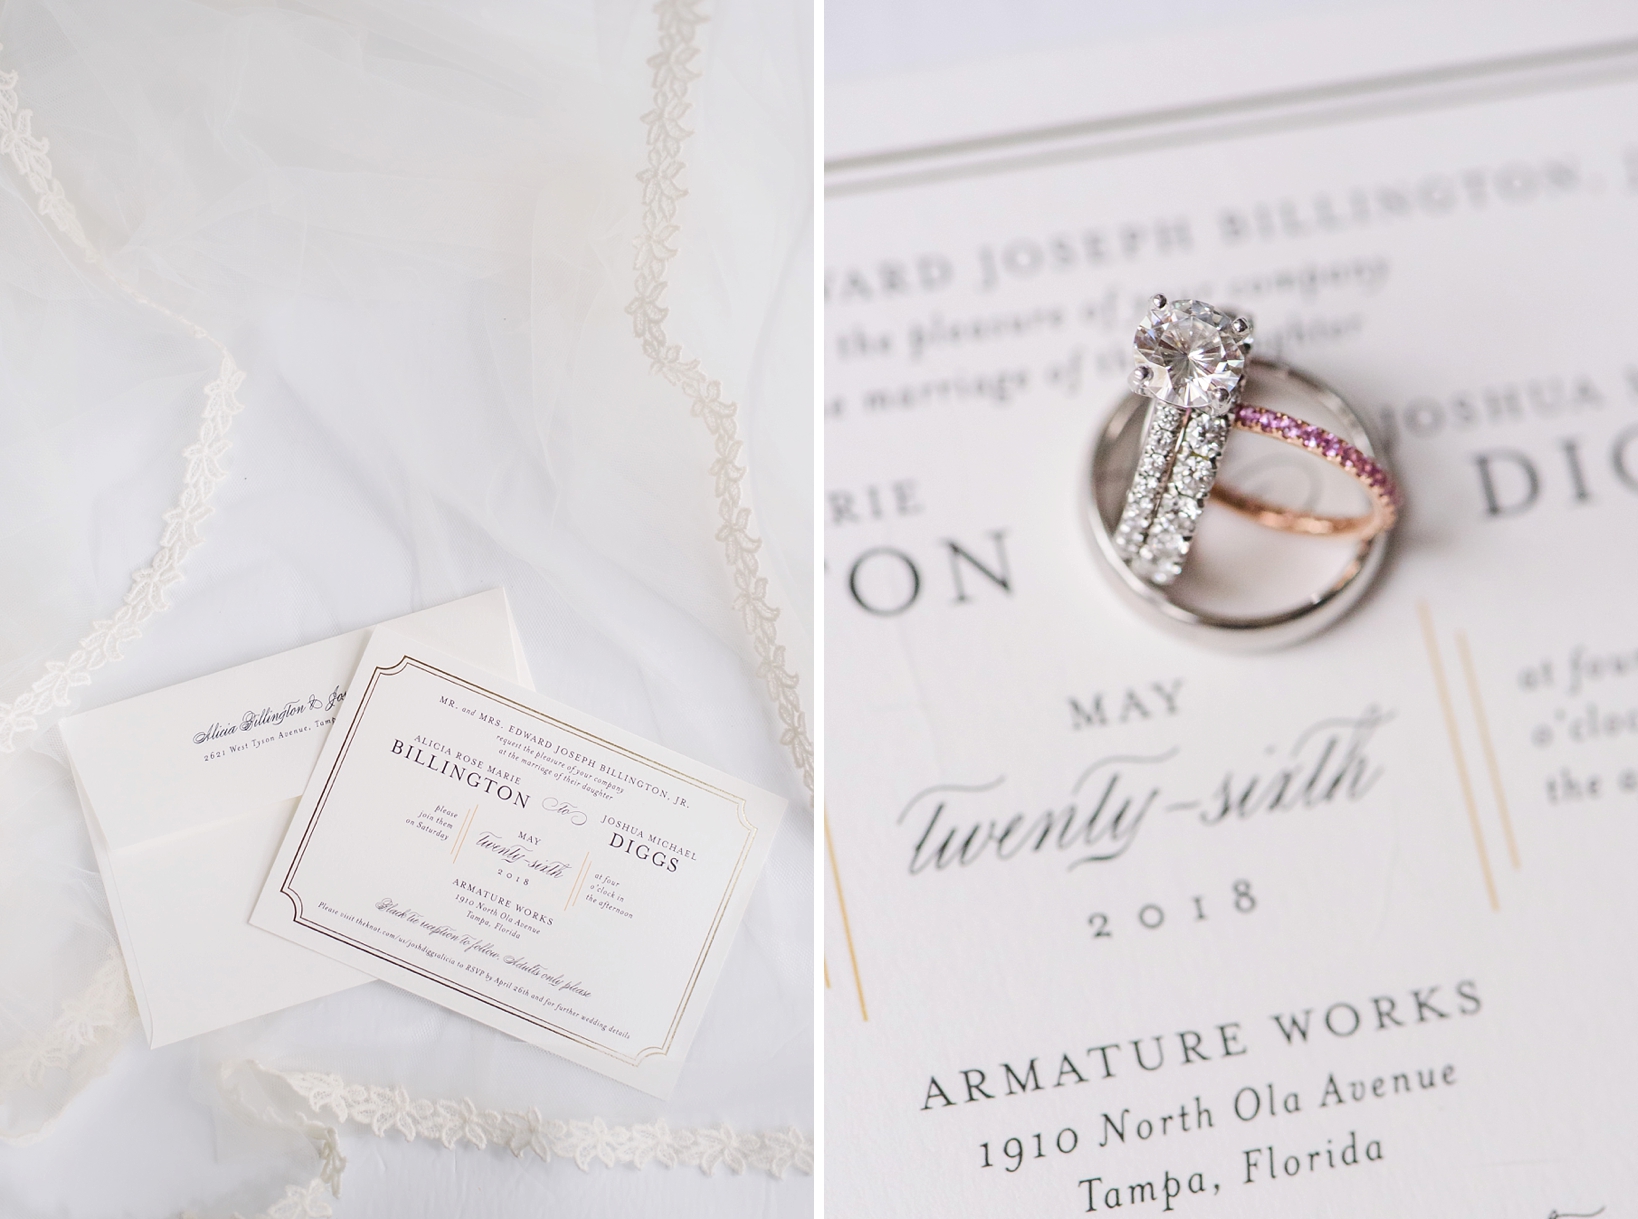 Wedding invitation suite and the wedding bands against the save the date